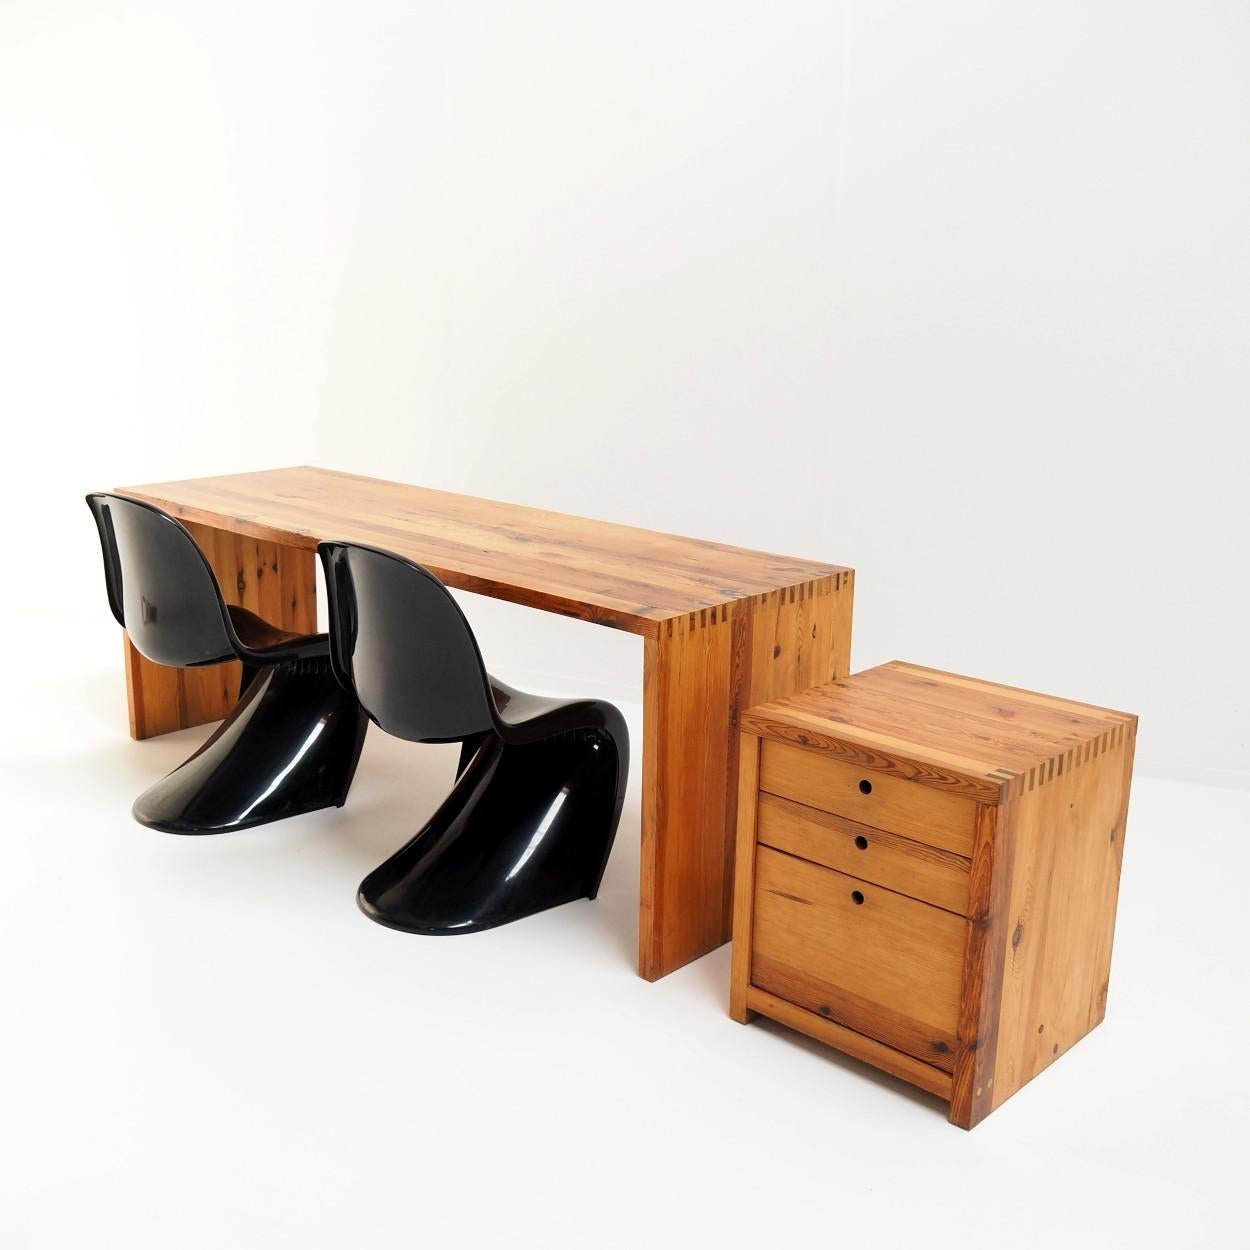 Late 20th Century Desk with Drawer Unit in Solid Pine by Dutch Designer Ate Van Apeldoorn For Sale